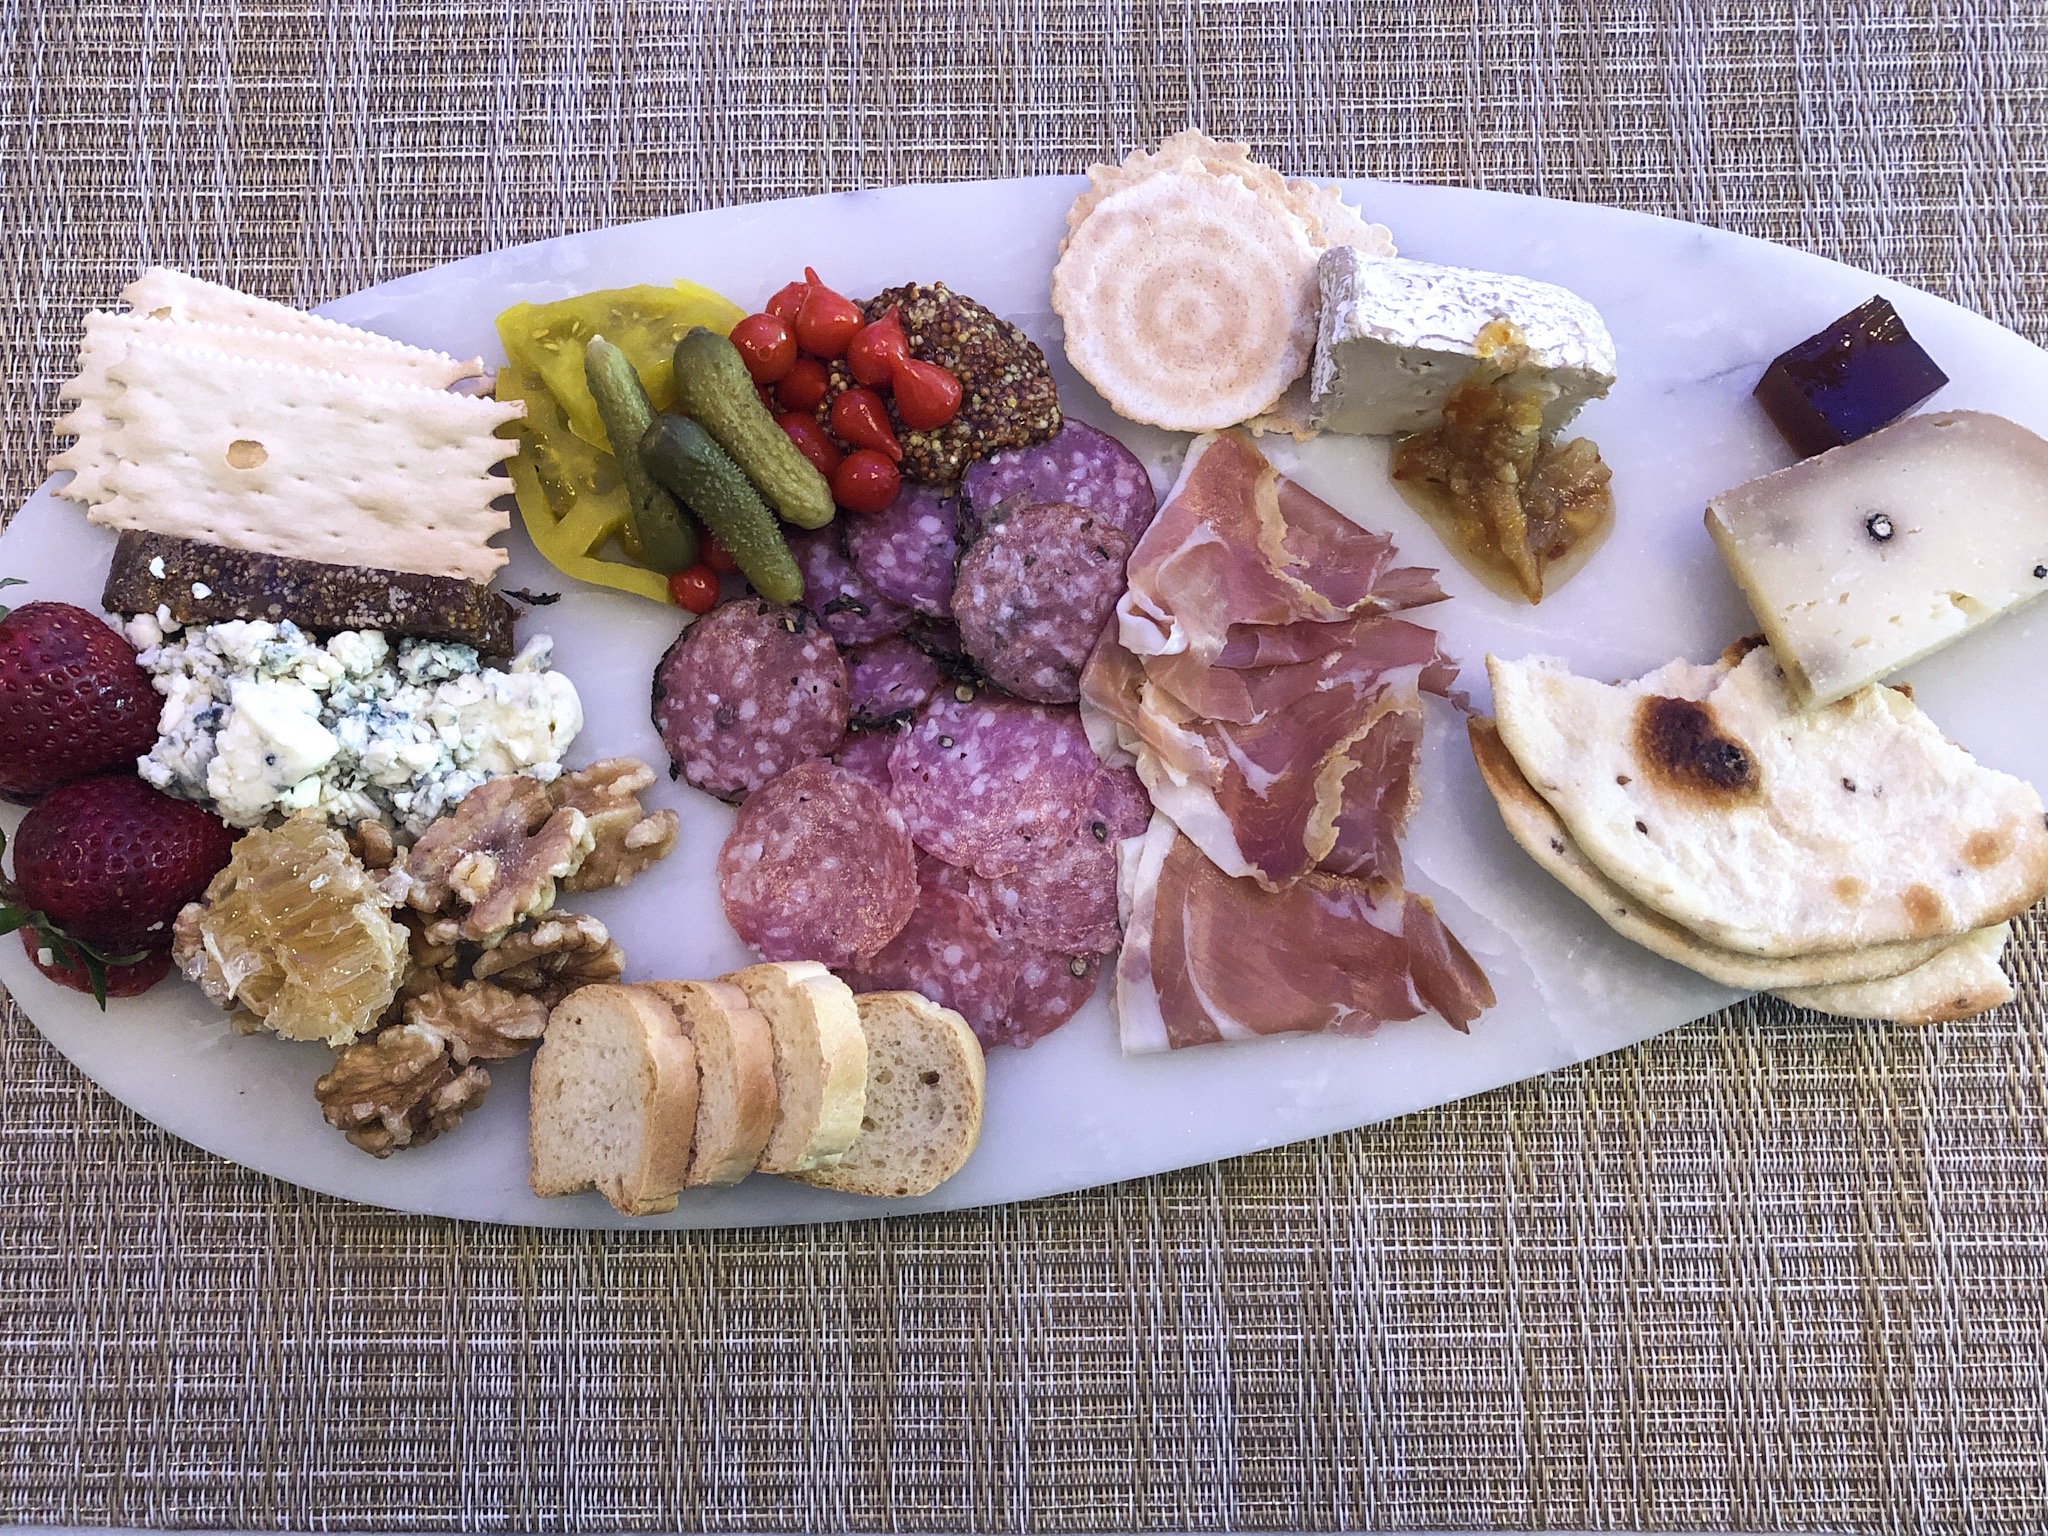 Top 20 Cheese & Charcuterie Boards St Petersburg, FL Rated by Locals